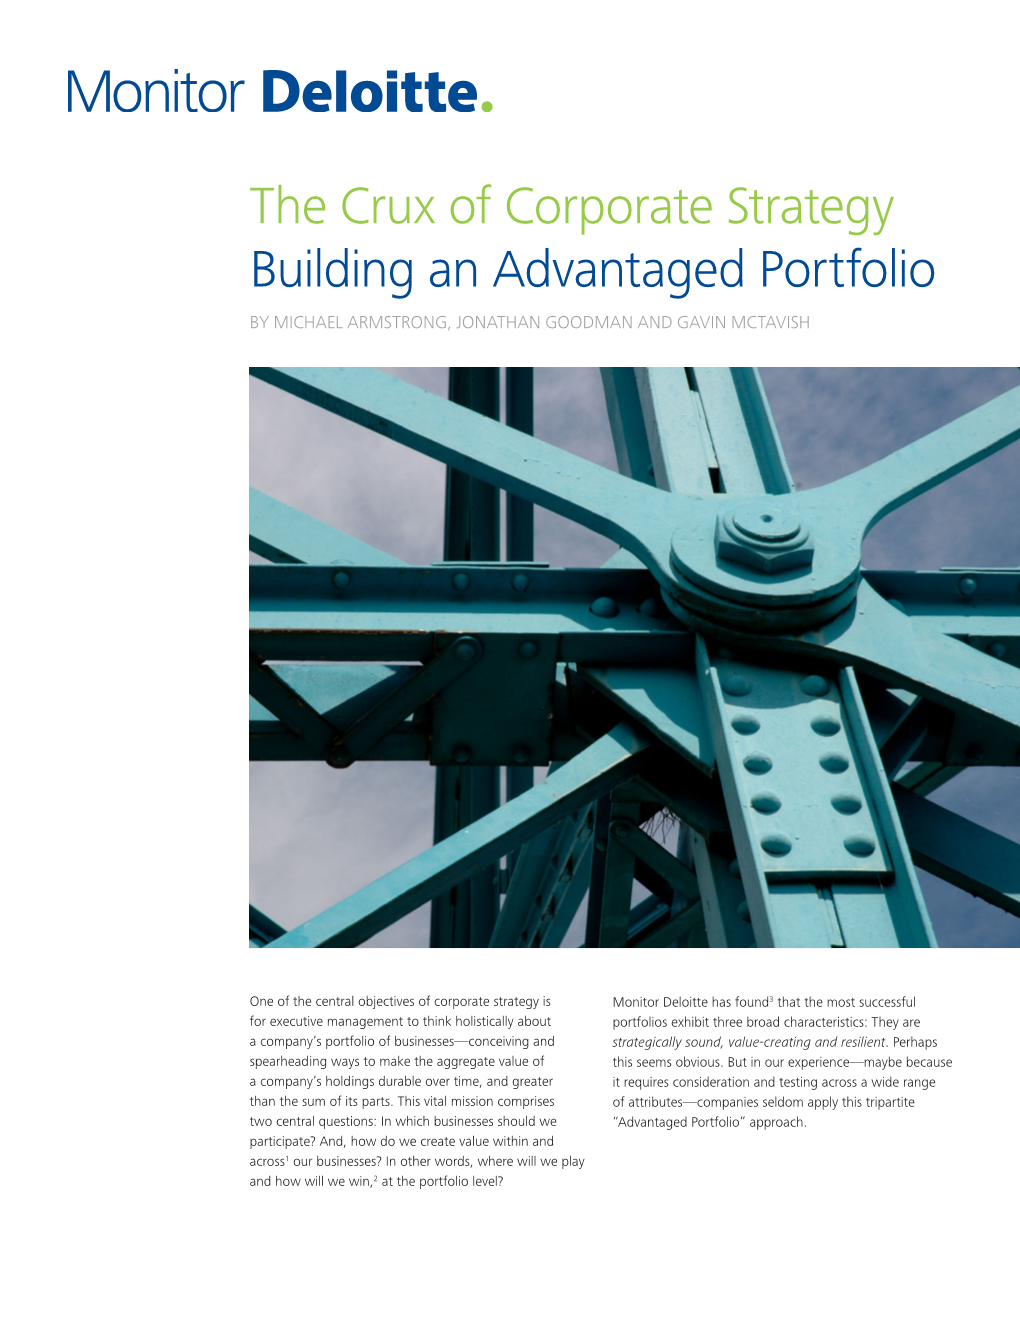 The Crux of Corporate Strategy Building an Advantaged Portfolio by MICHAEL ARMSTRONG, JONATHAN GOODMAN and GAVIN MCTAVISH